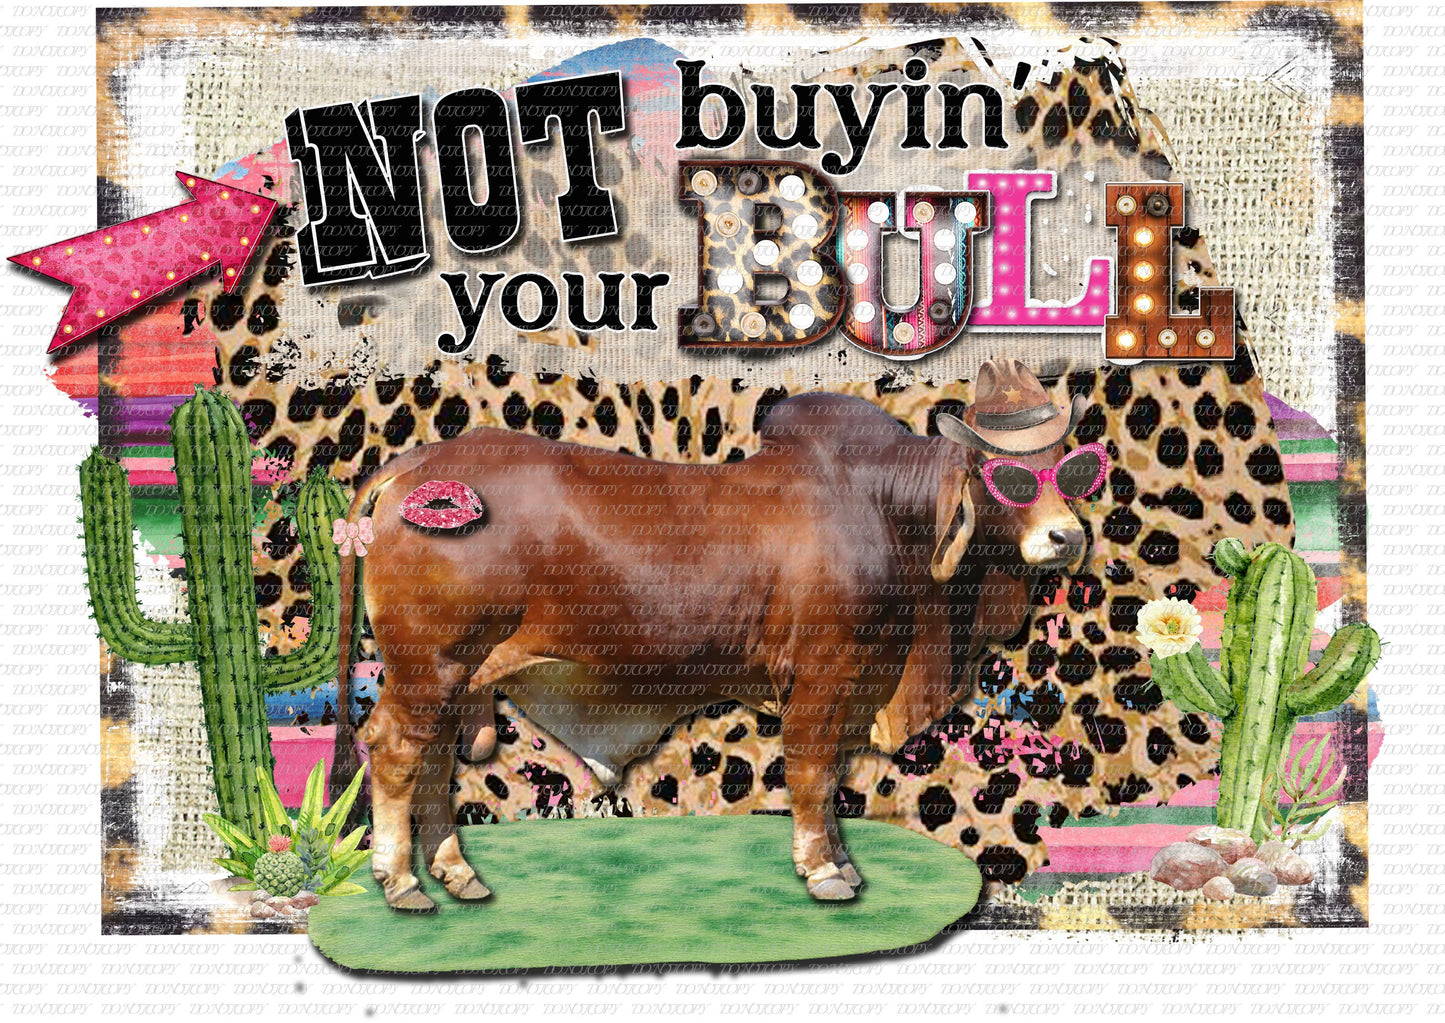 Not Buying Your Bull, Country, Western, Sublimation Transfer